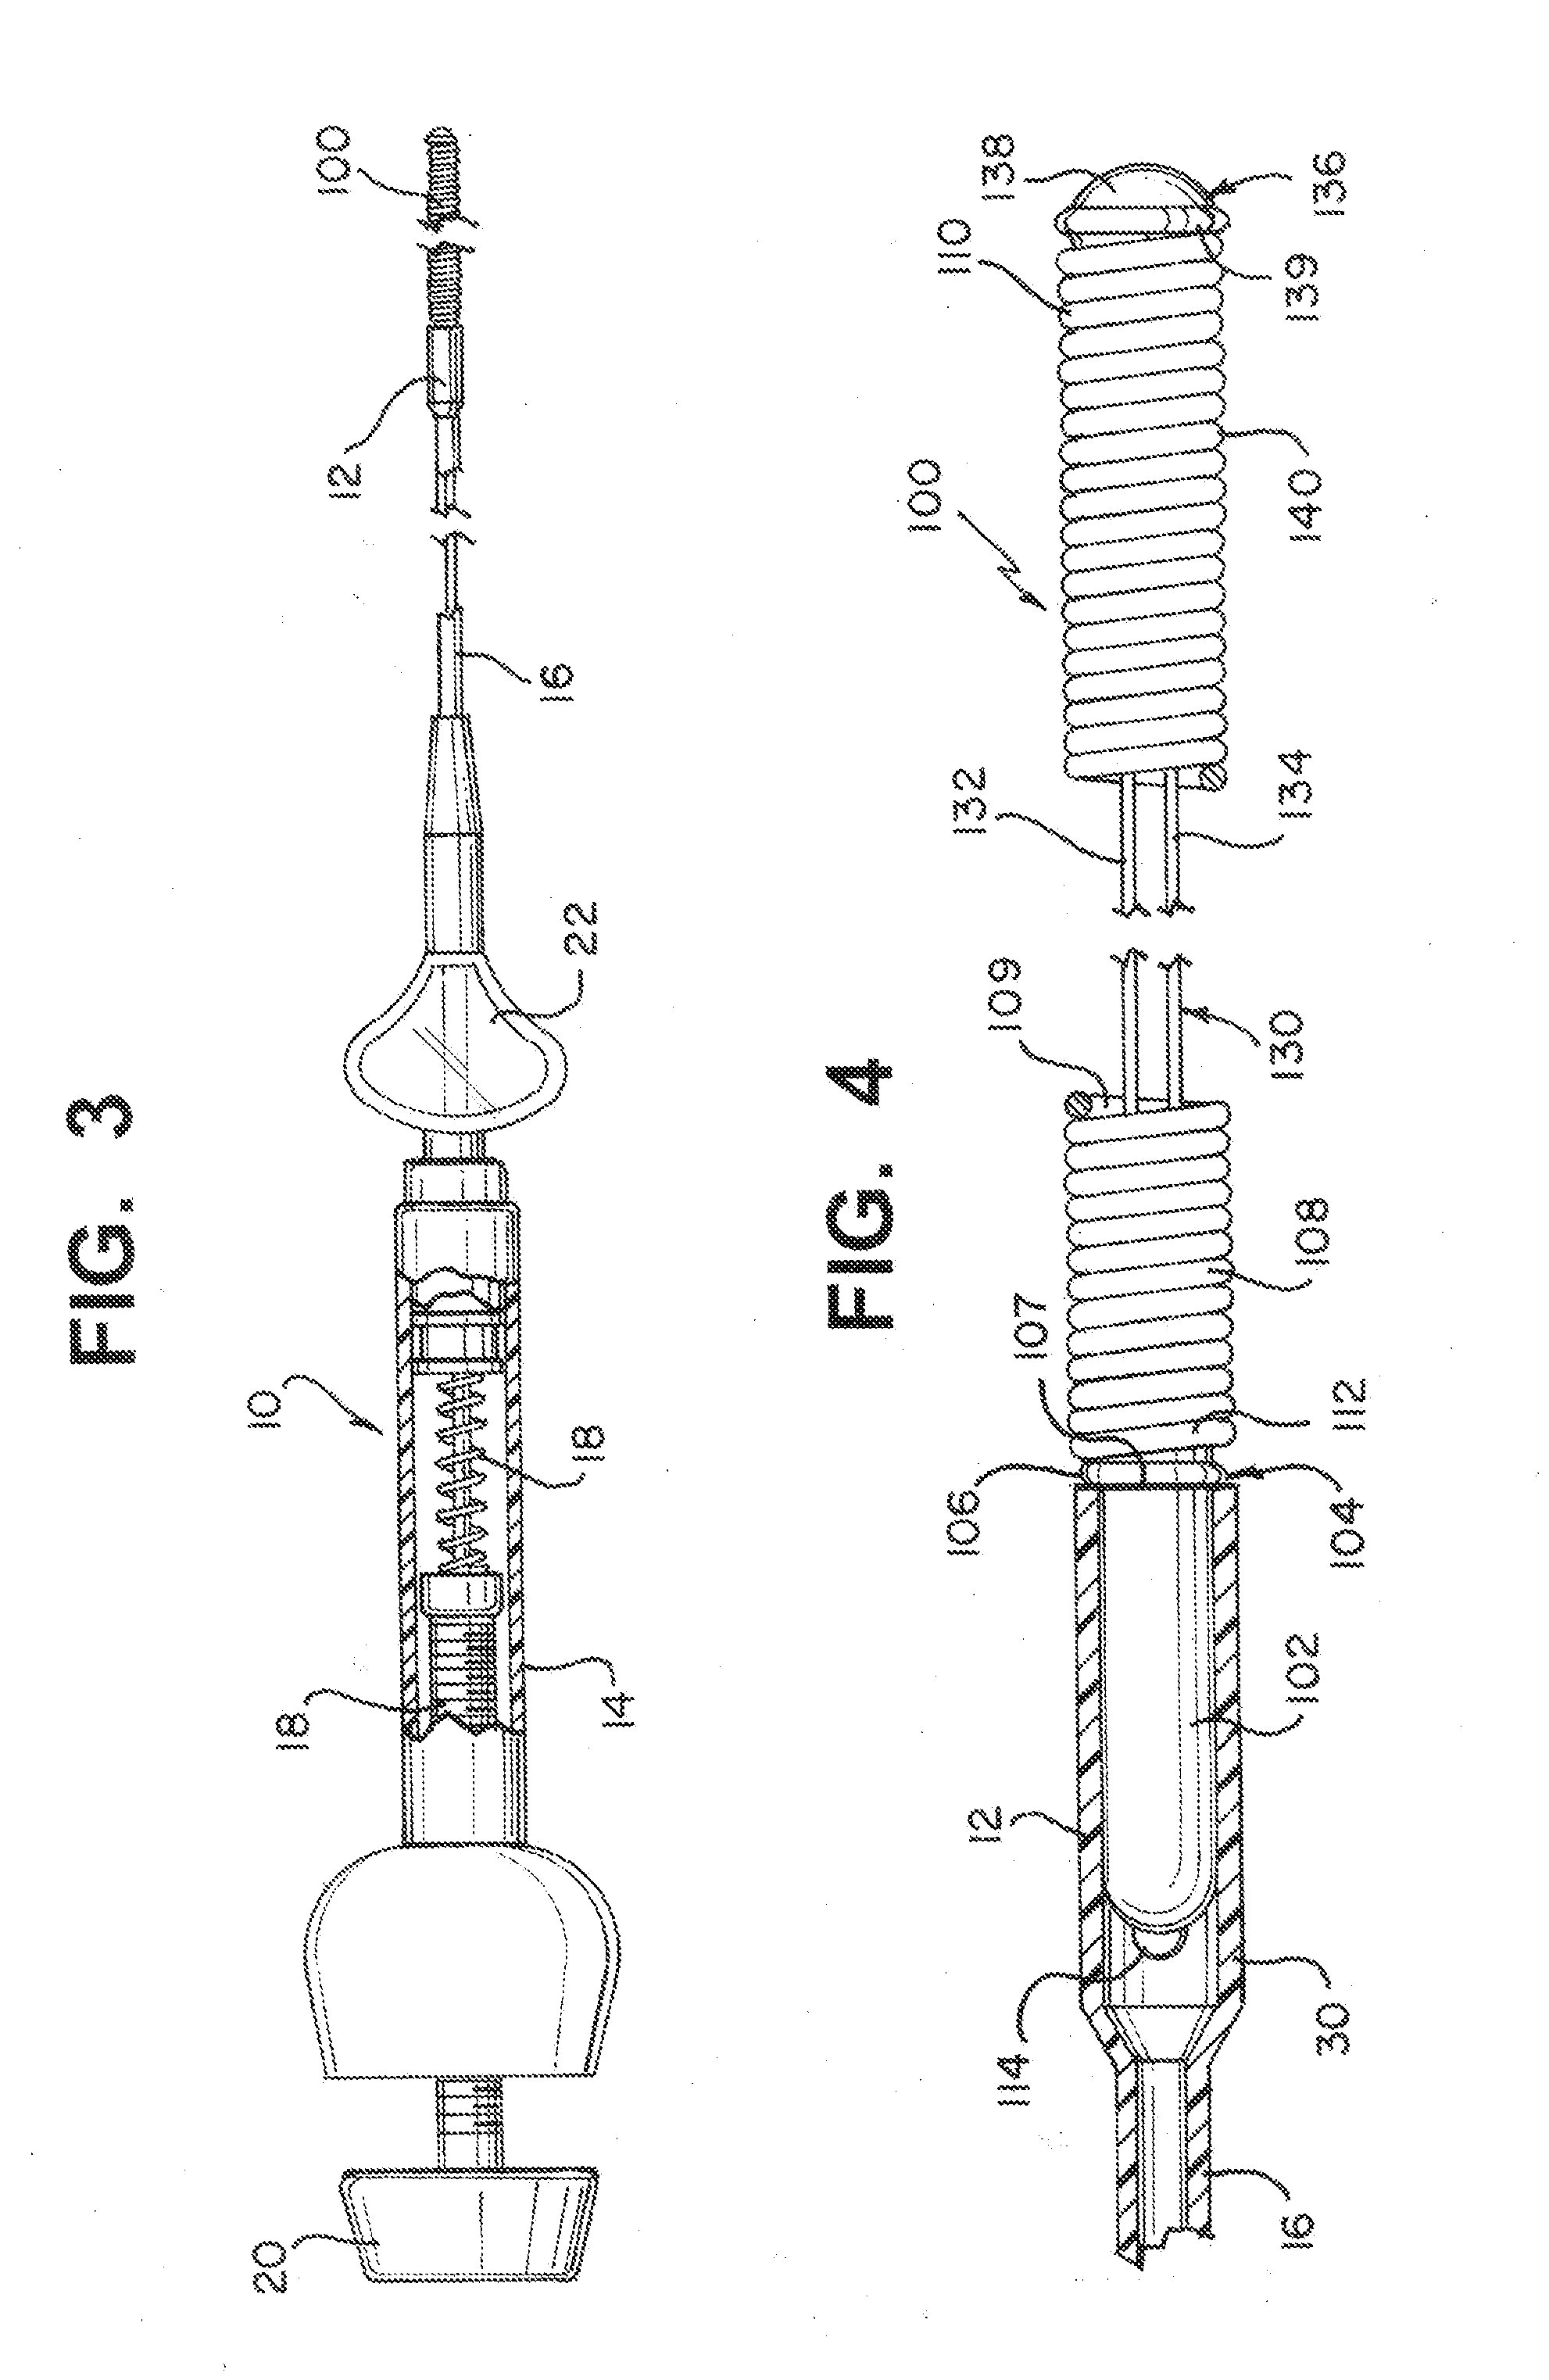 Occlusive device with porous structure and stretch resistant member